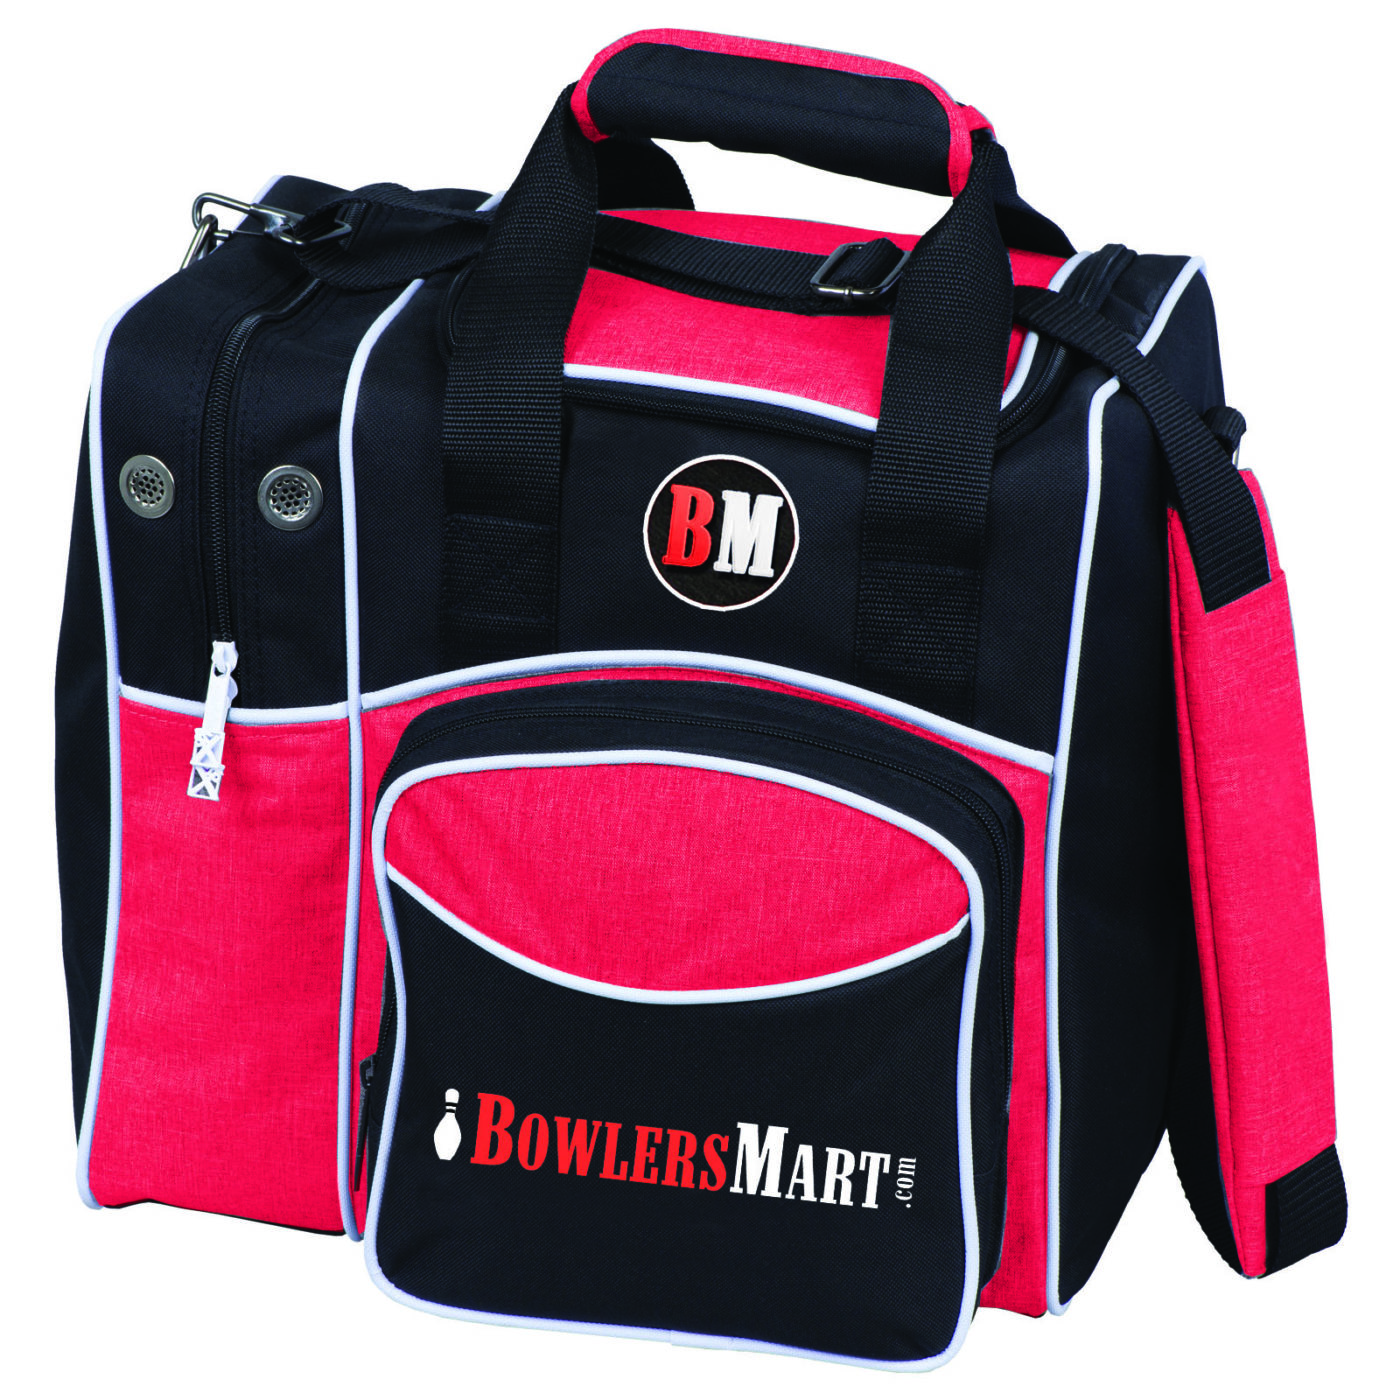 Buy Storm Solo Bowling Bag (1-Ball), Black Online at Low Prices in India -  Amazon.in